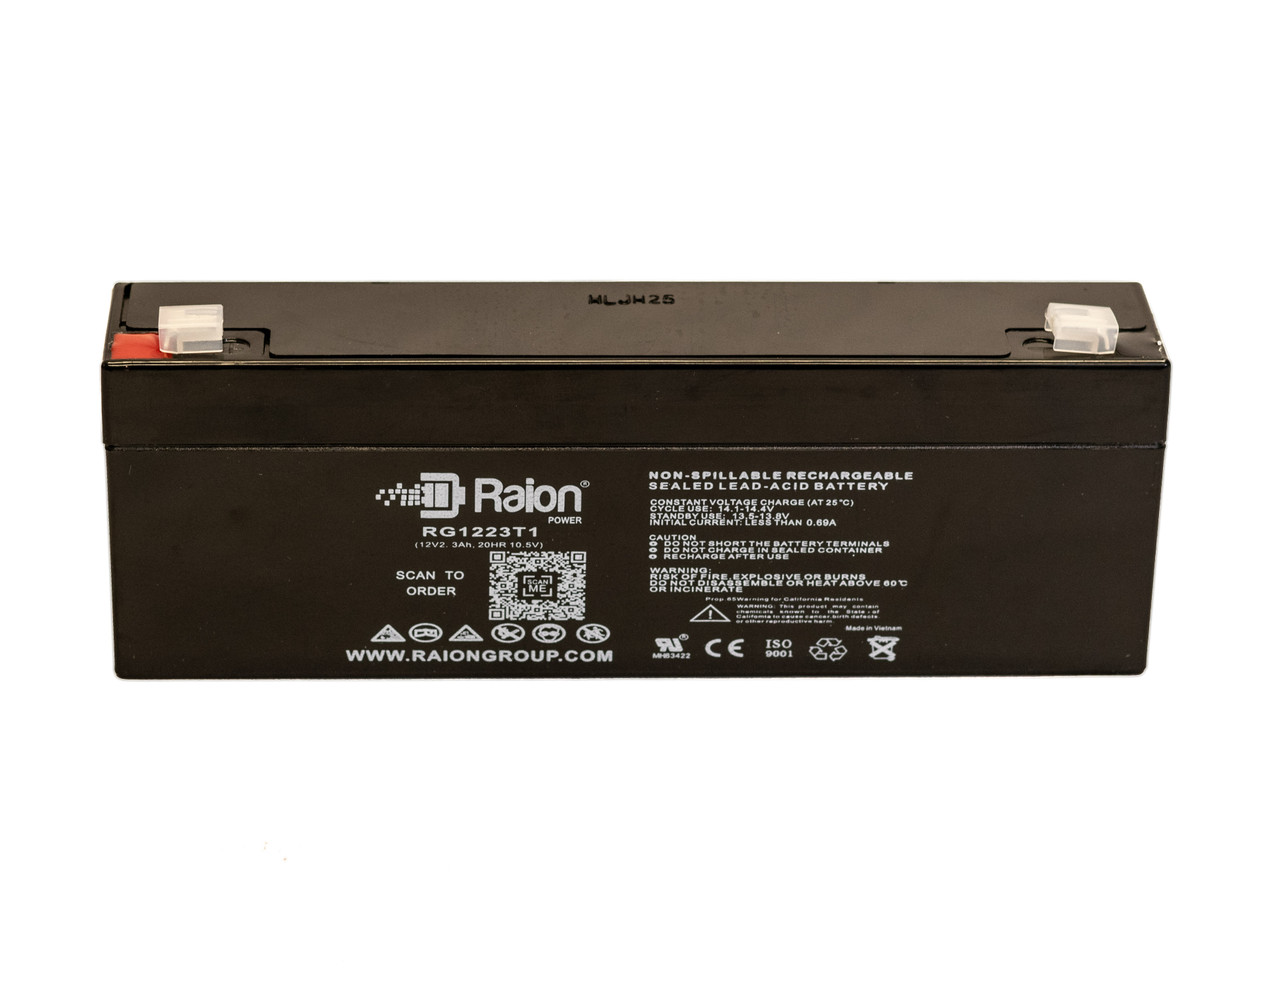 Raion Power 12V 2.3Ah SLA Battery With T1 Terminals For Baxter Healthcare AS70 Auto Syringe